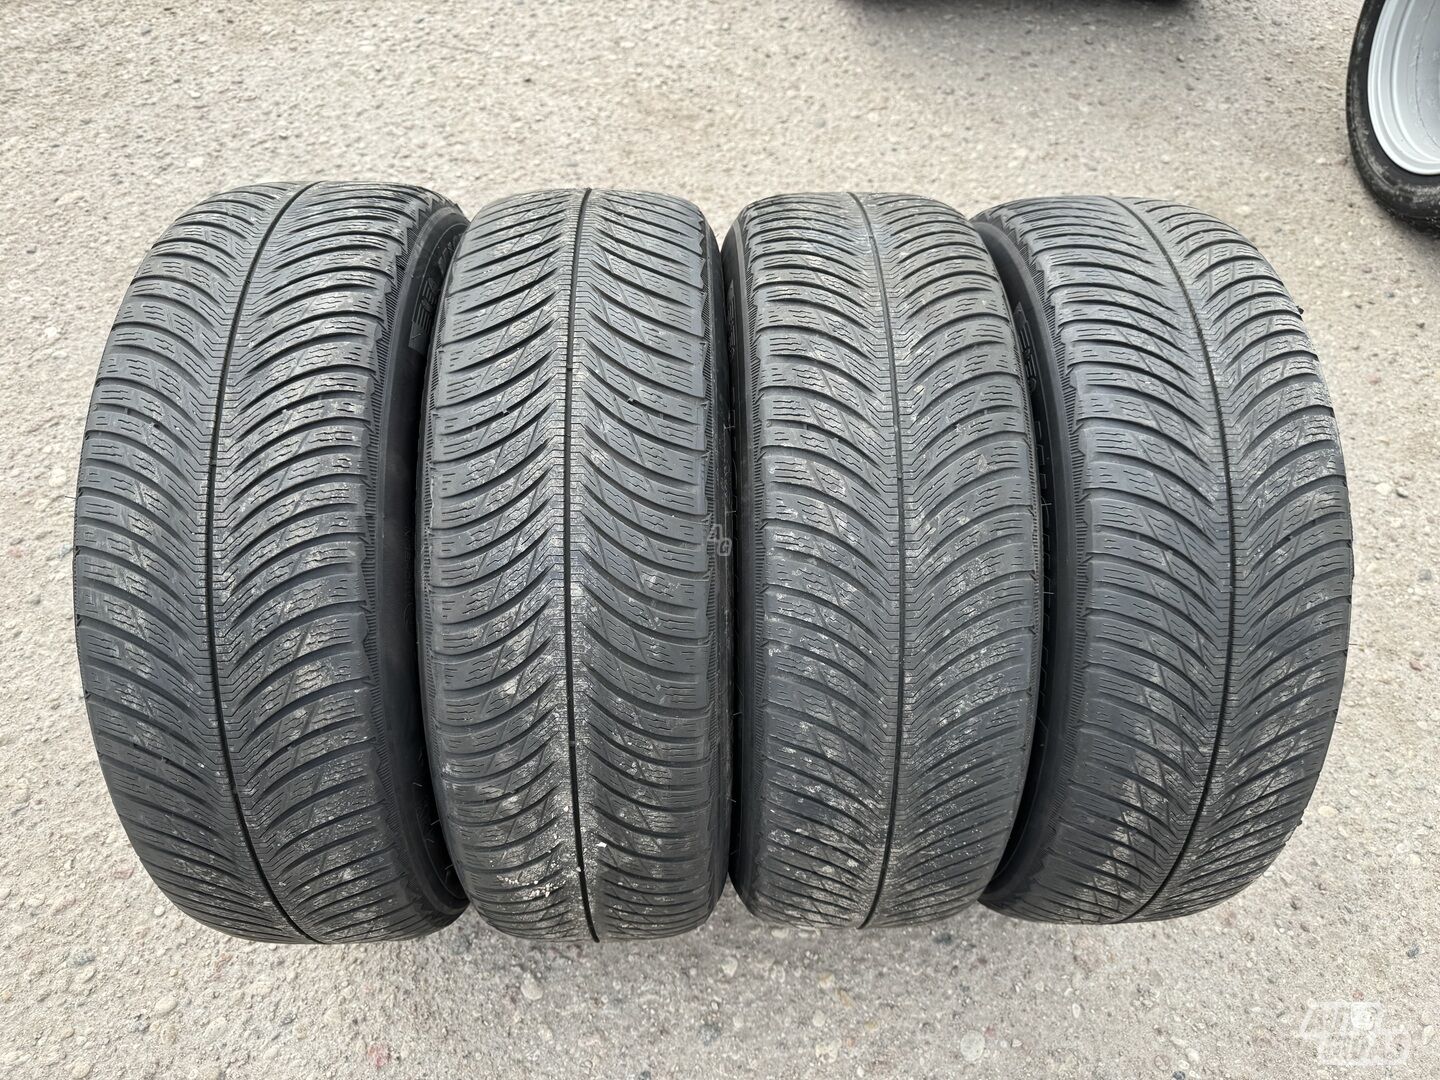 Michelin Siunciam, 5-6mm 2020 R18 universal tyres passanger car